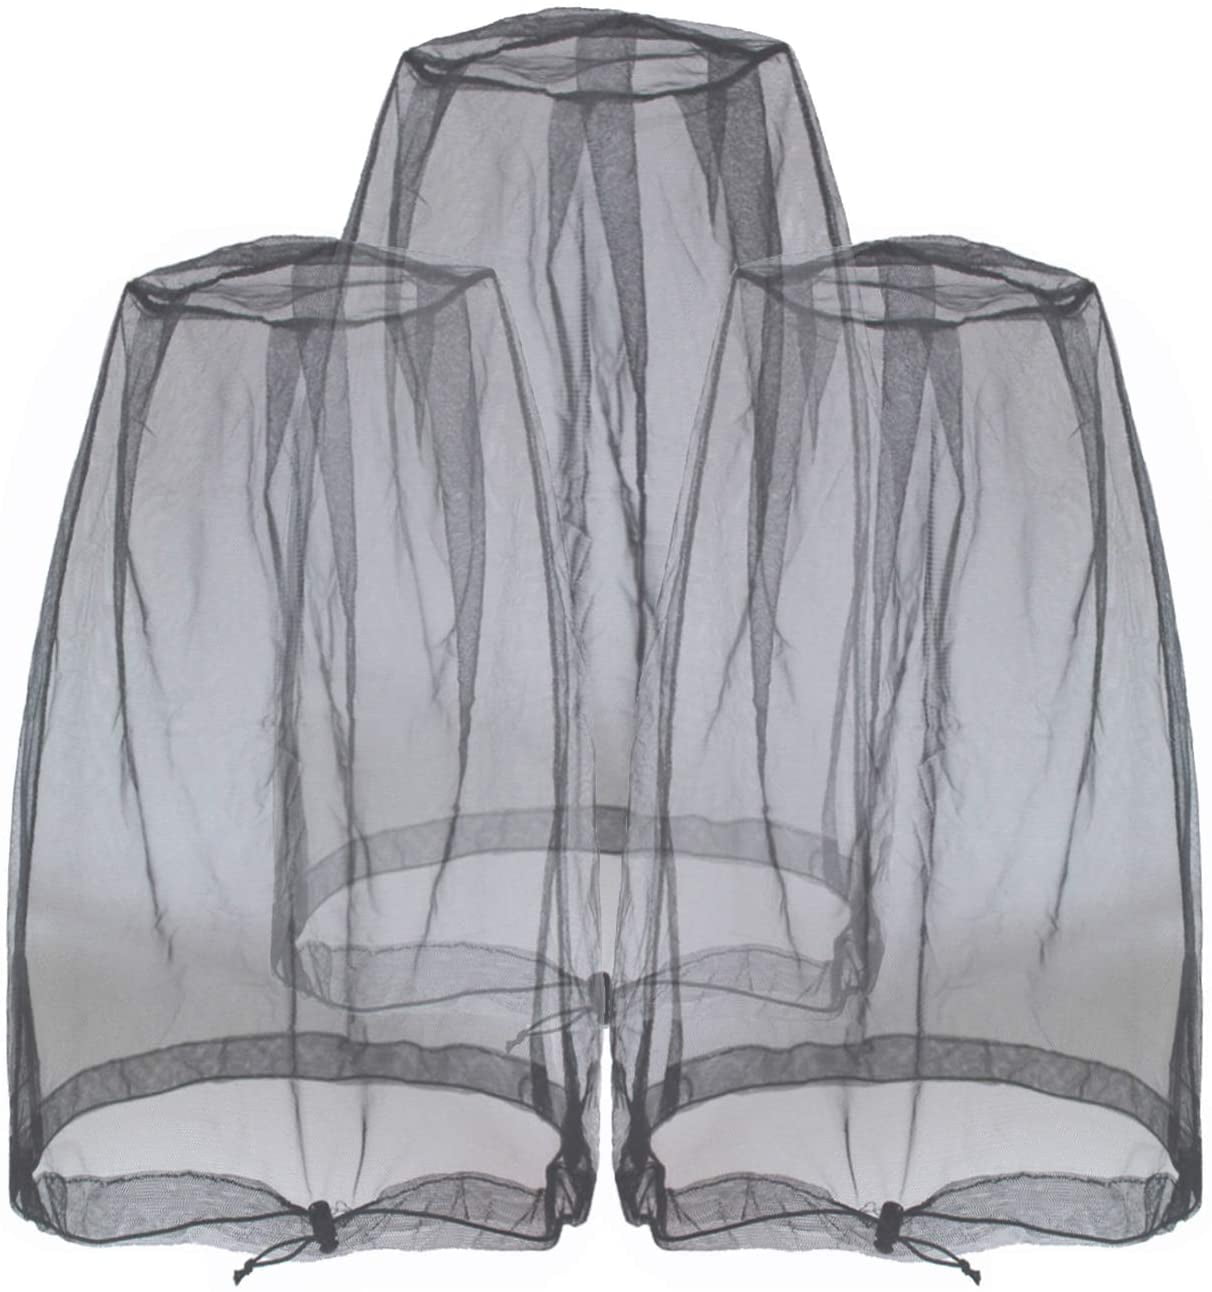 4 Pack Mosquito Head Net Face Netting Neck Cover Netting Mesh Net for Outdoor Activity 